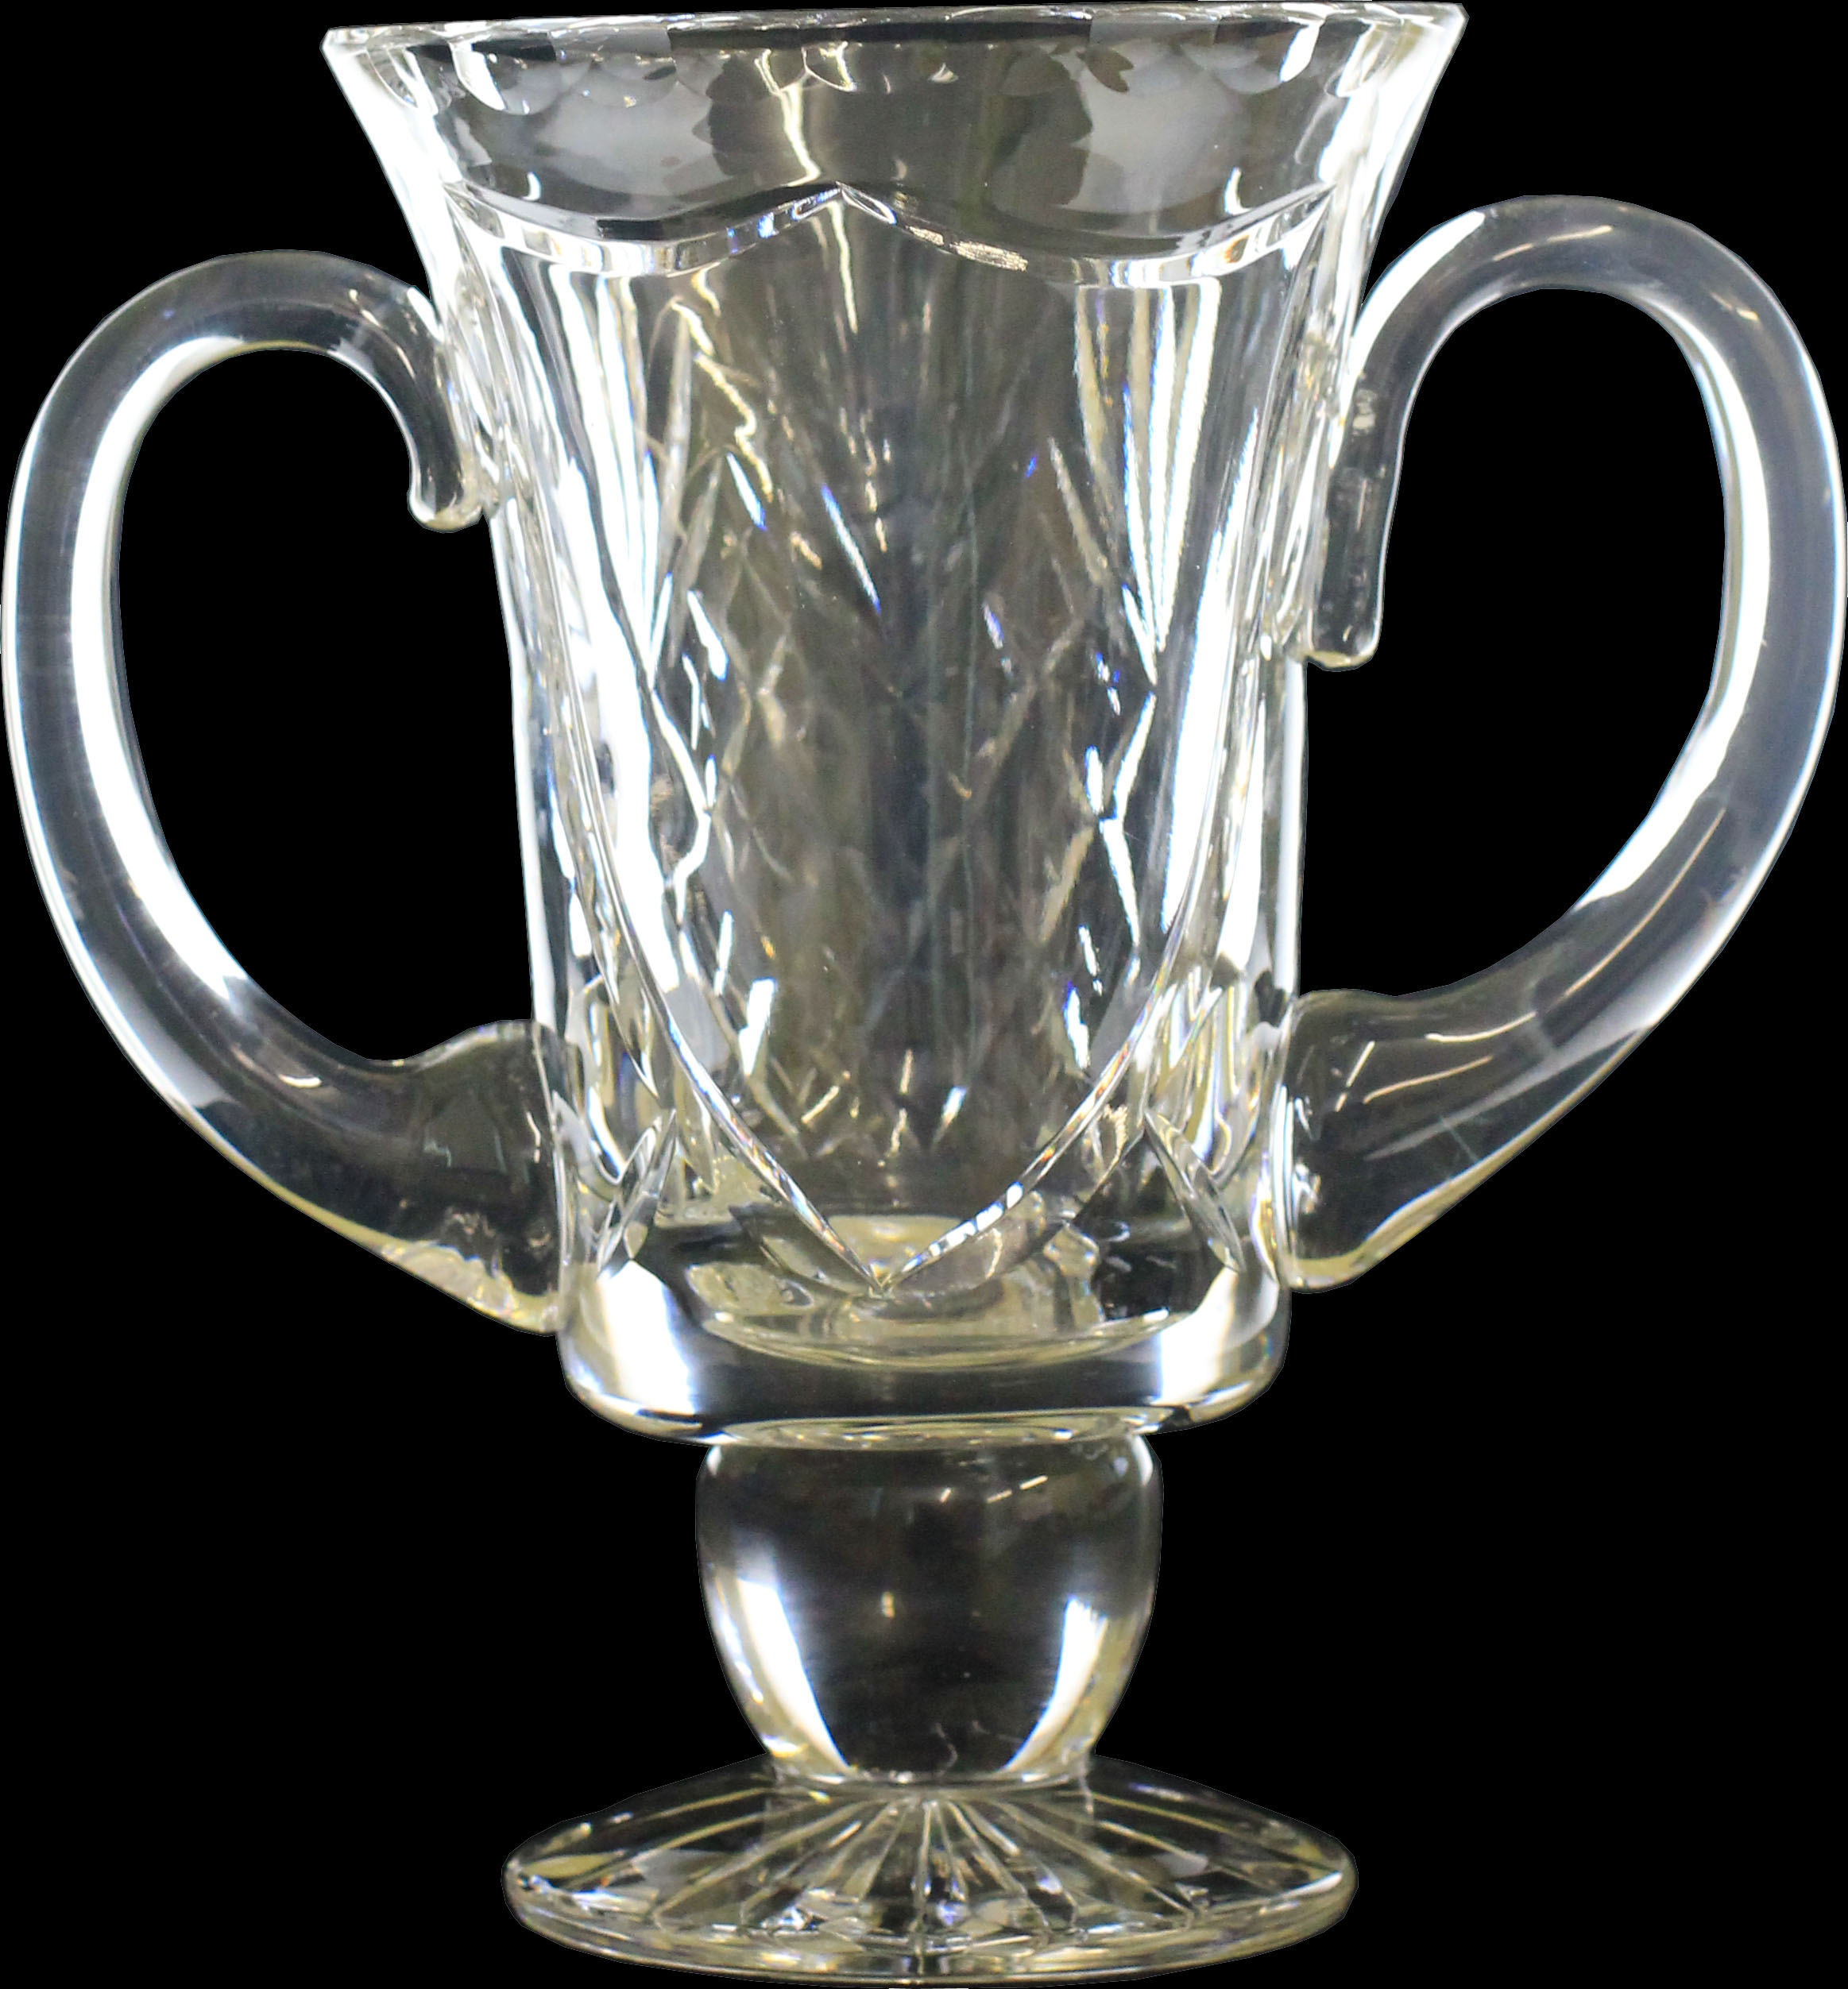 Westminster 8 Inch Loving Cup Engraved